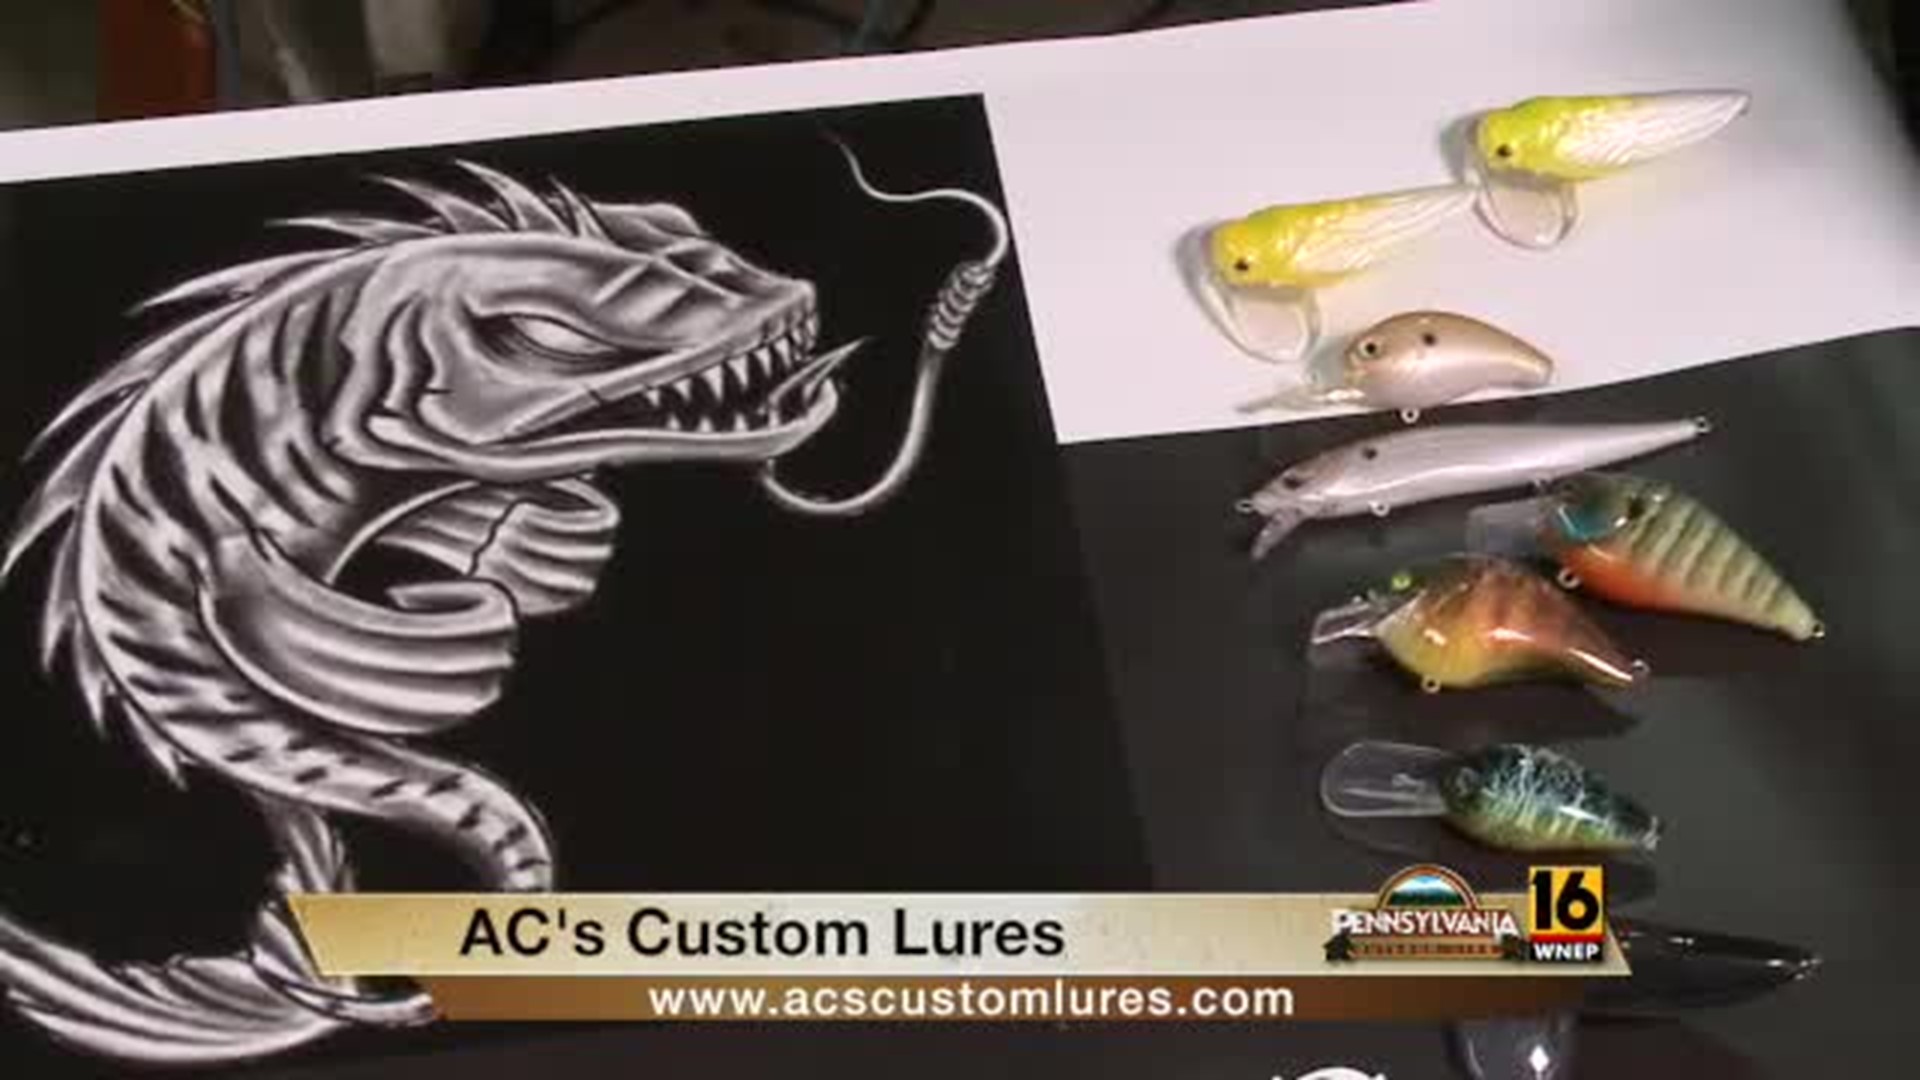 AC's Custom Lures Product Giveaway